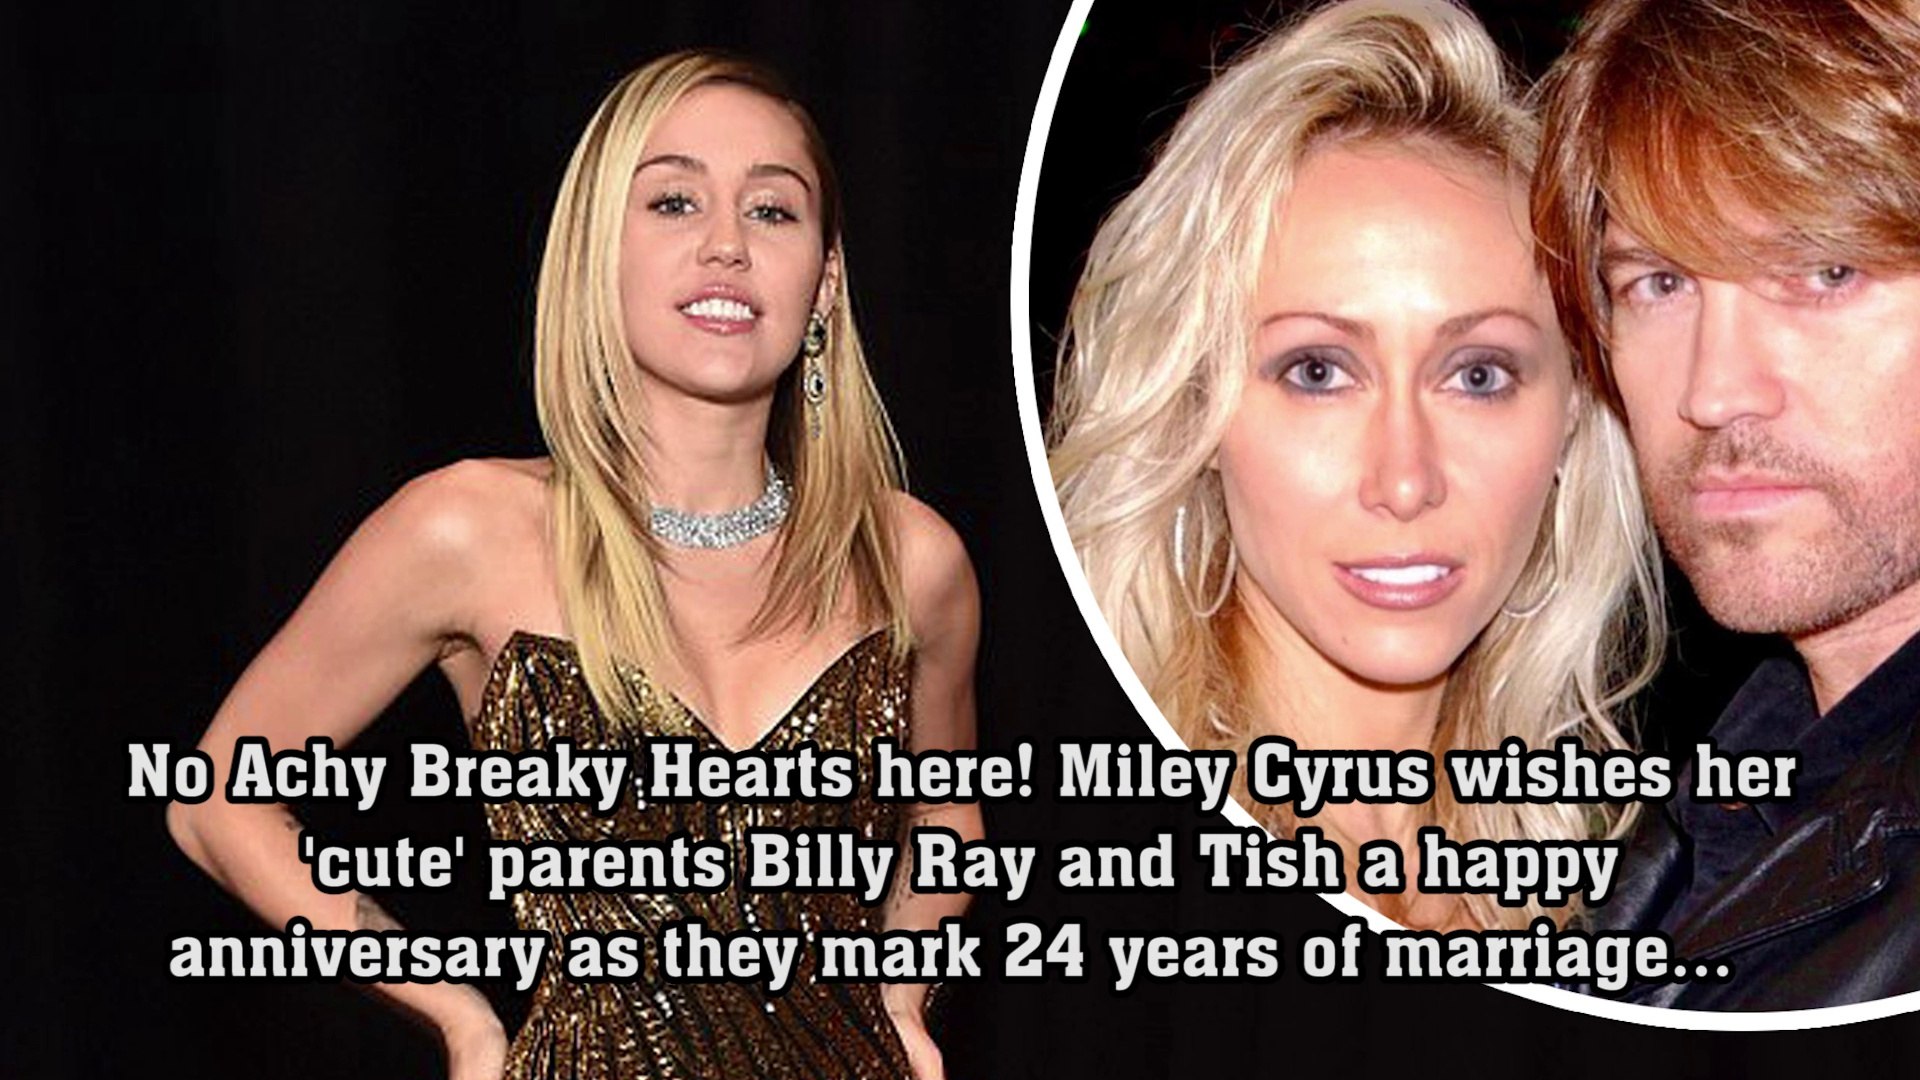 No Achy Breaky Hearts here! Miley Cyrus wishes her 'cute' parents Billy Ray and Tish a hap